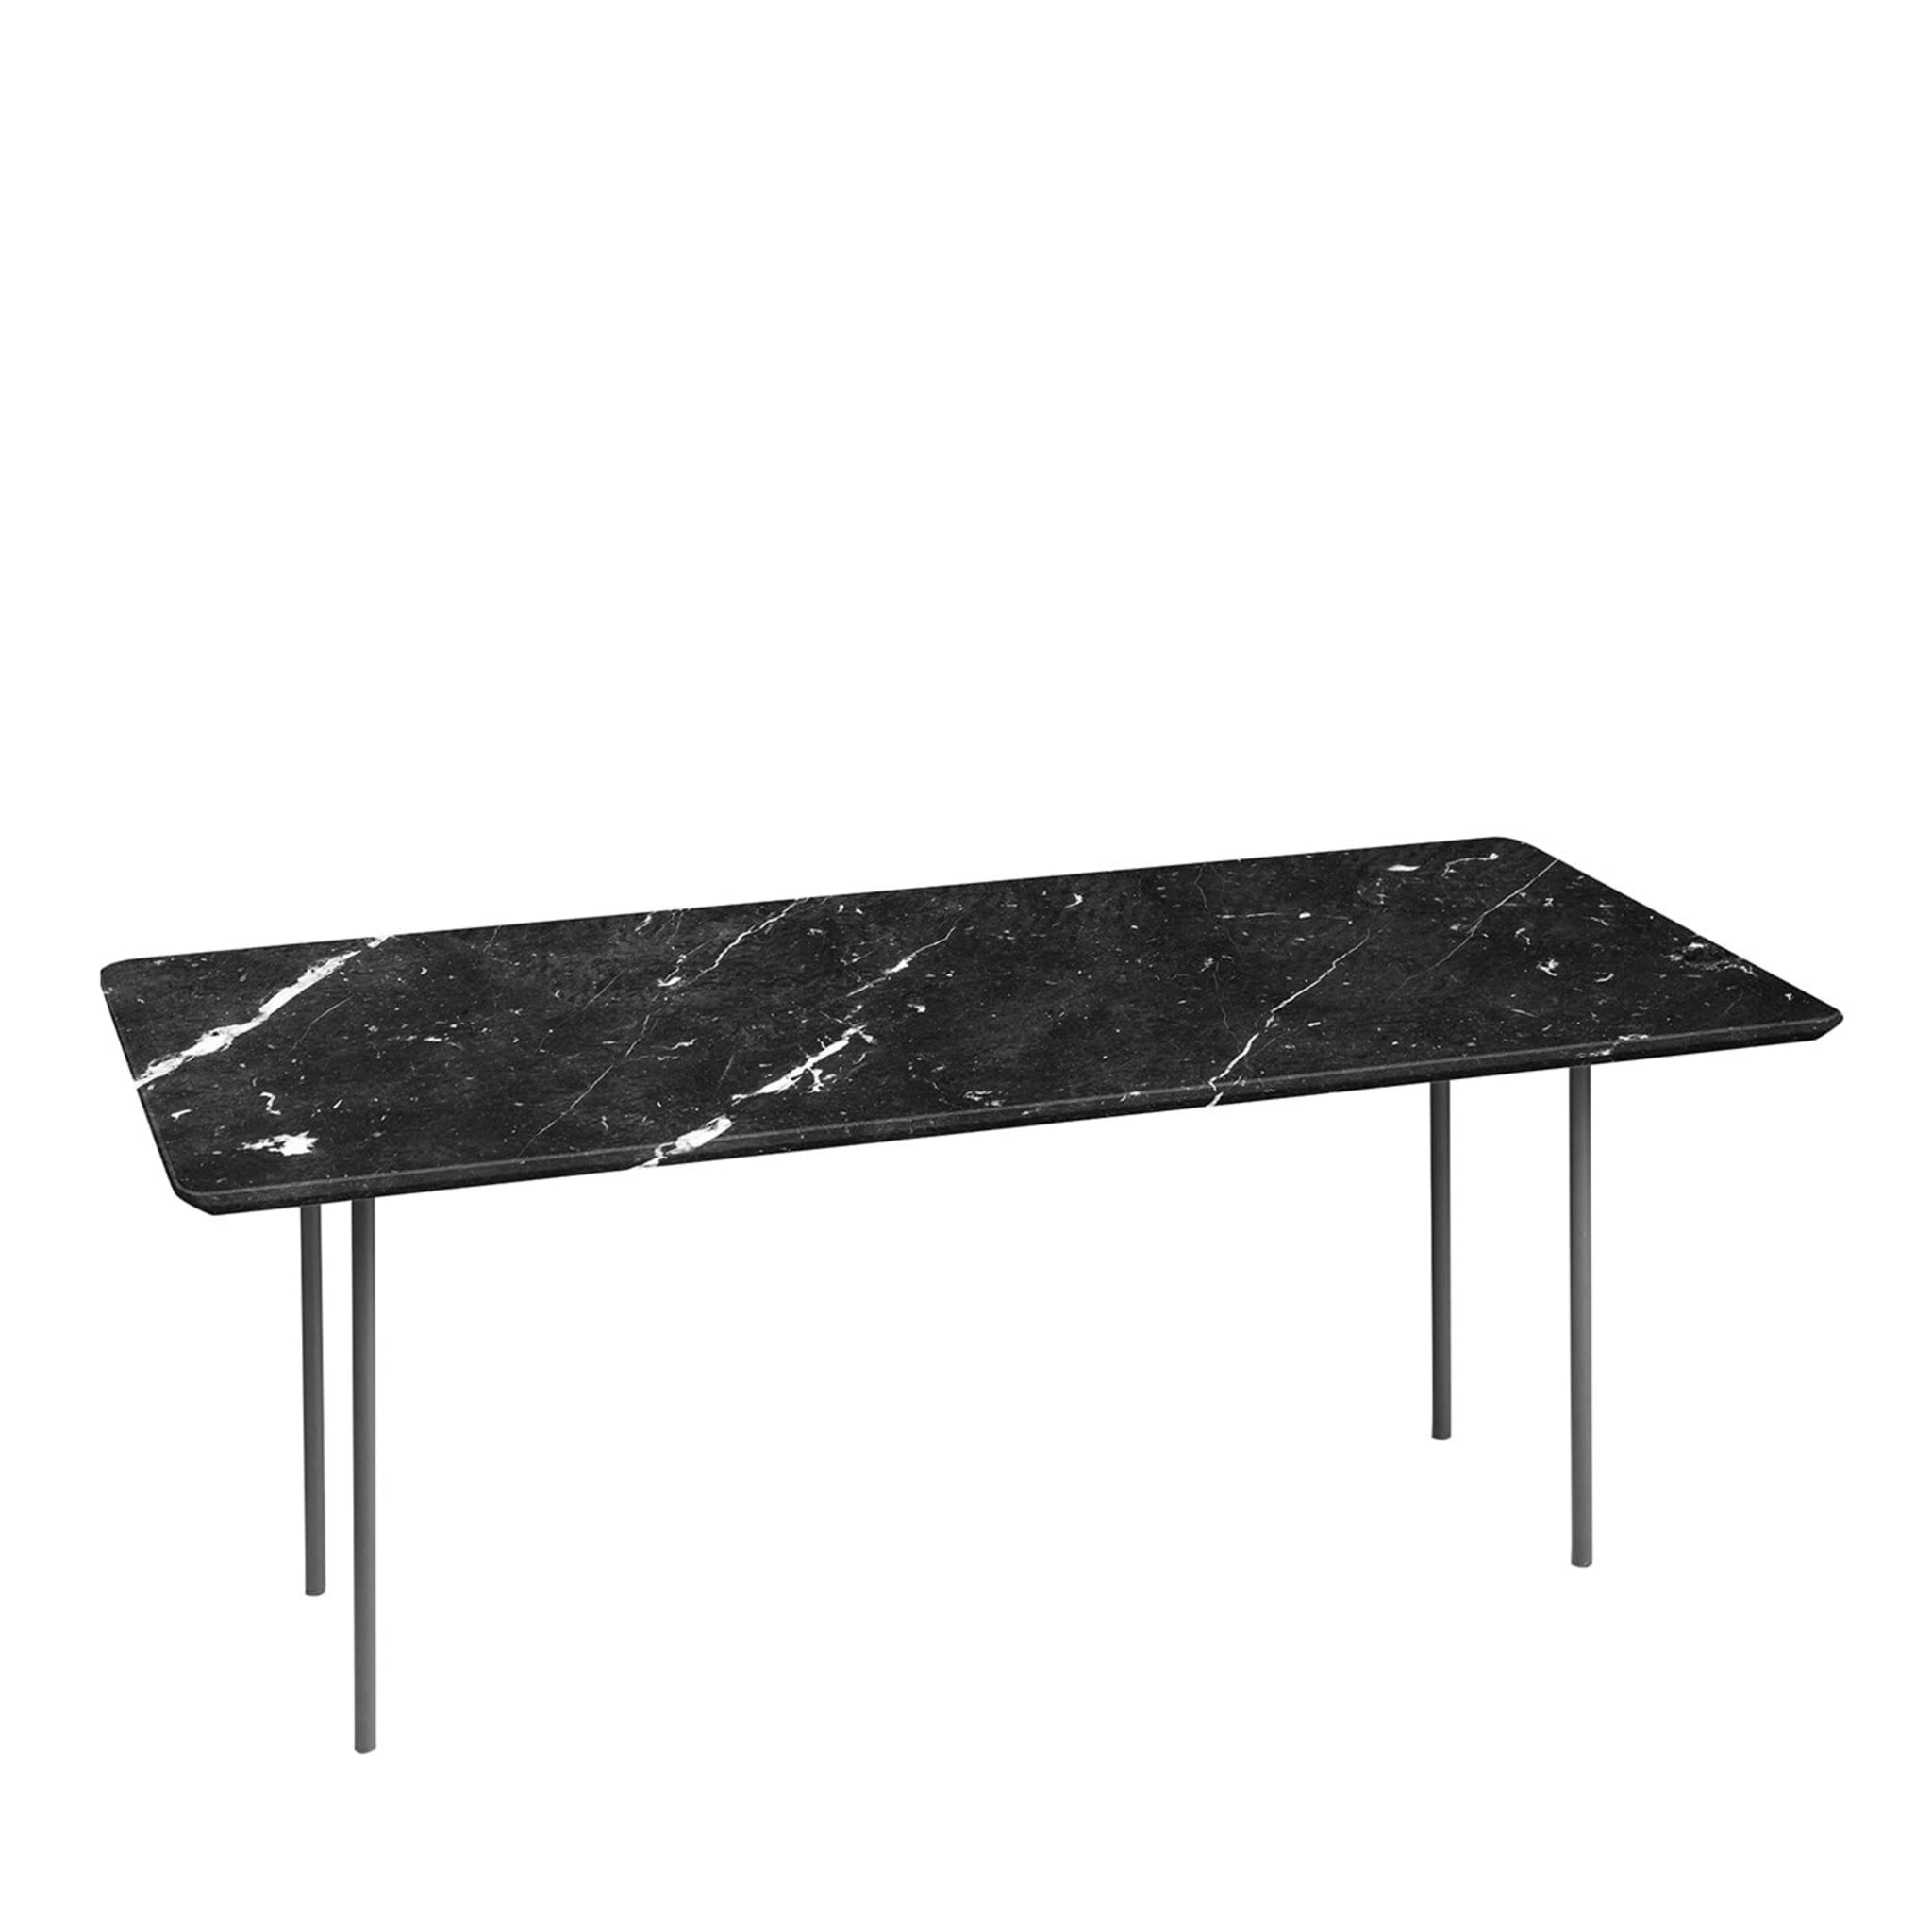 Giglio Black Marquinia Dining Table - Main view